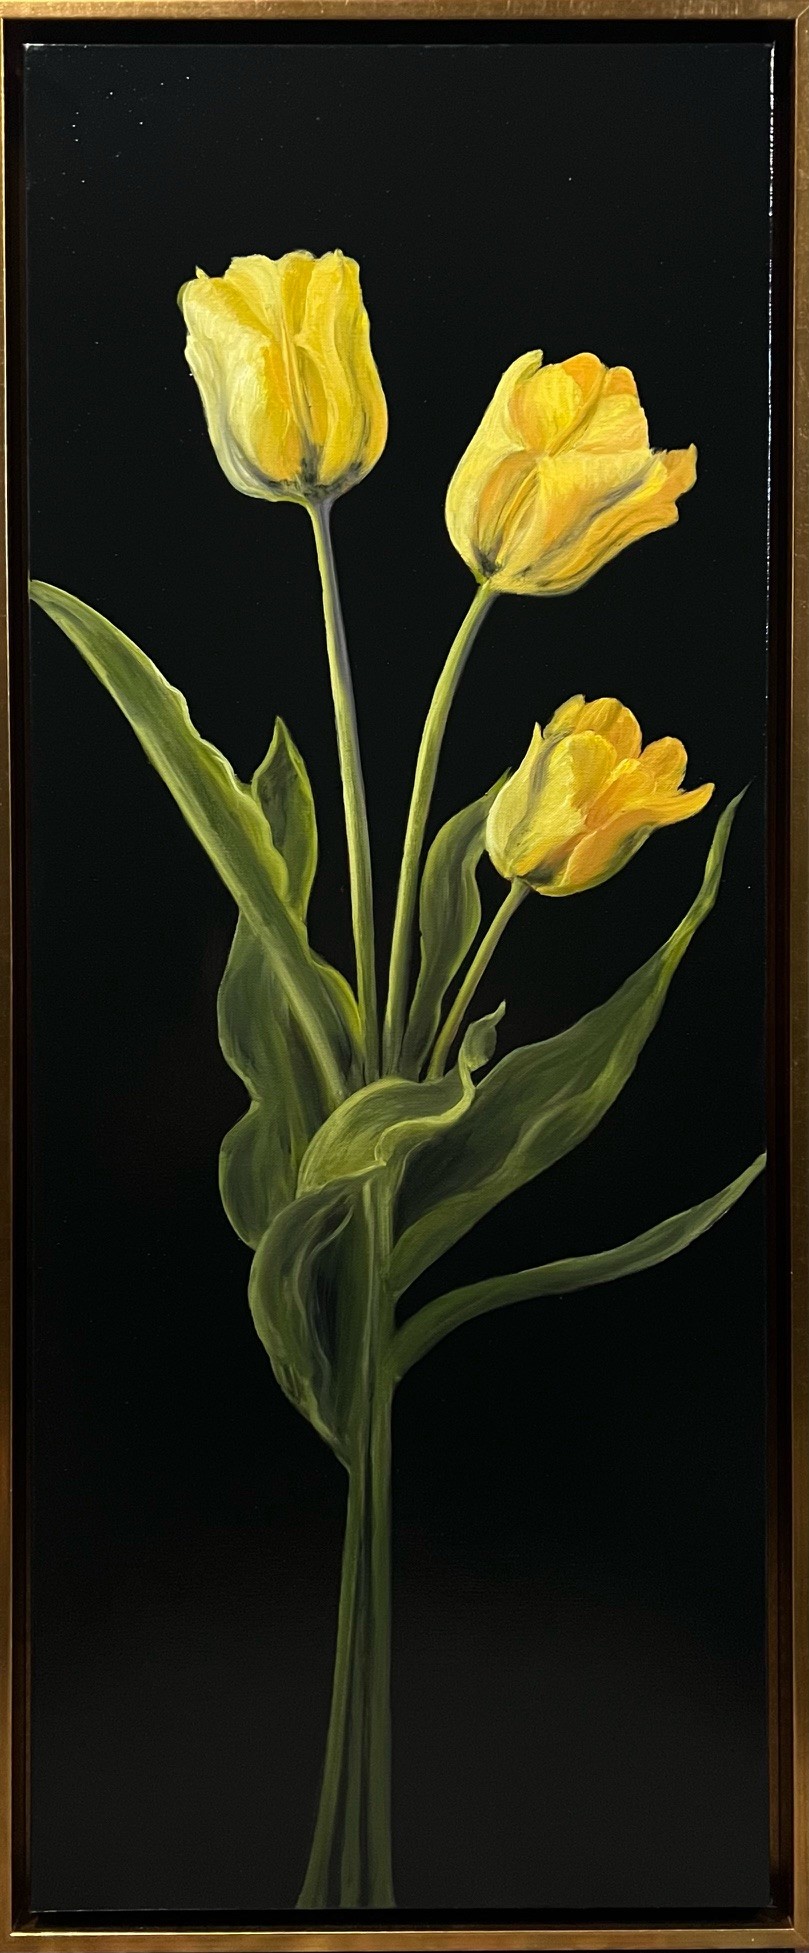 Golden Glory 40x16 $1900 at Hunter Wolff Gallery